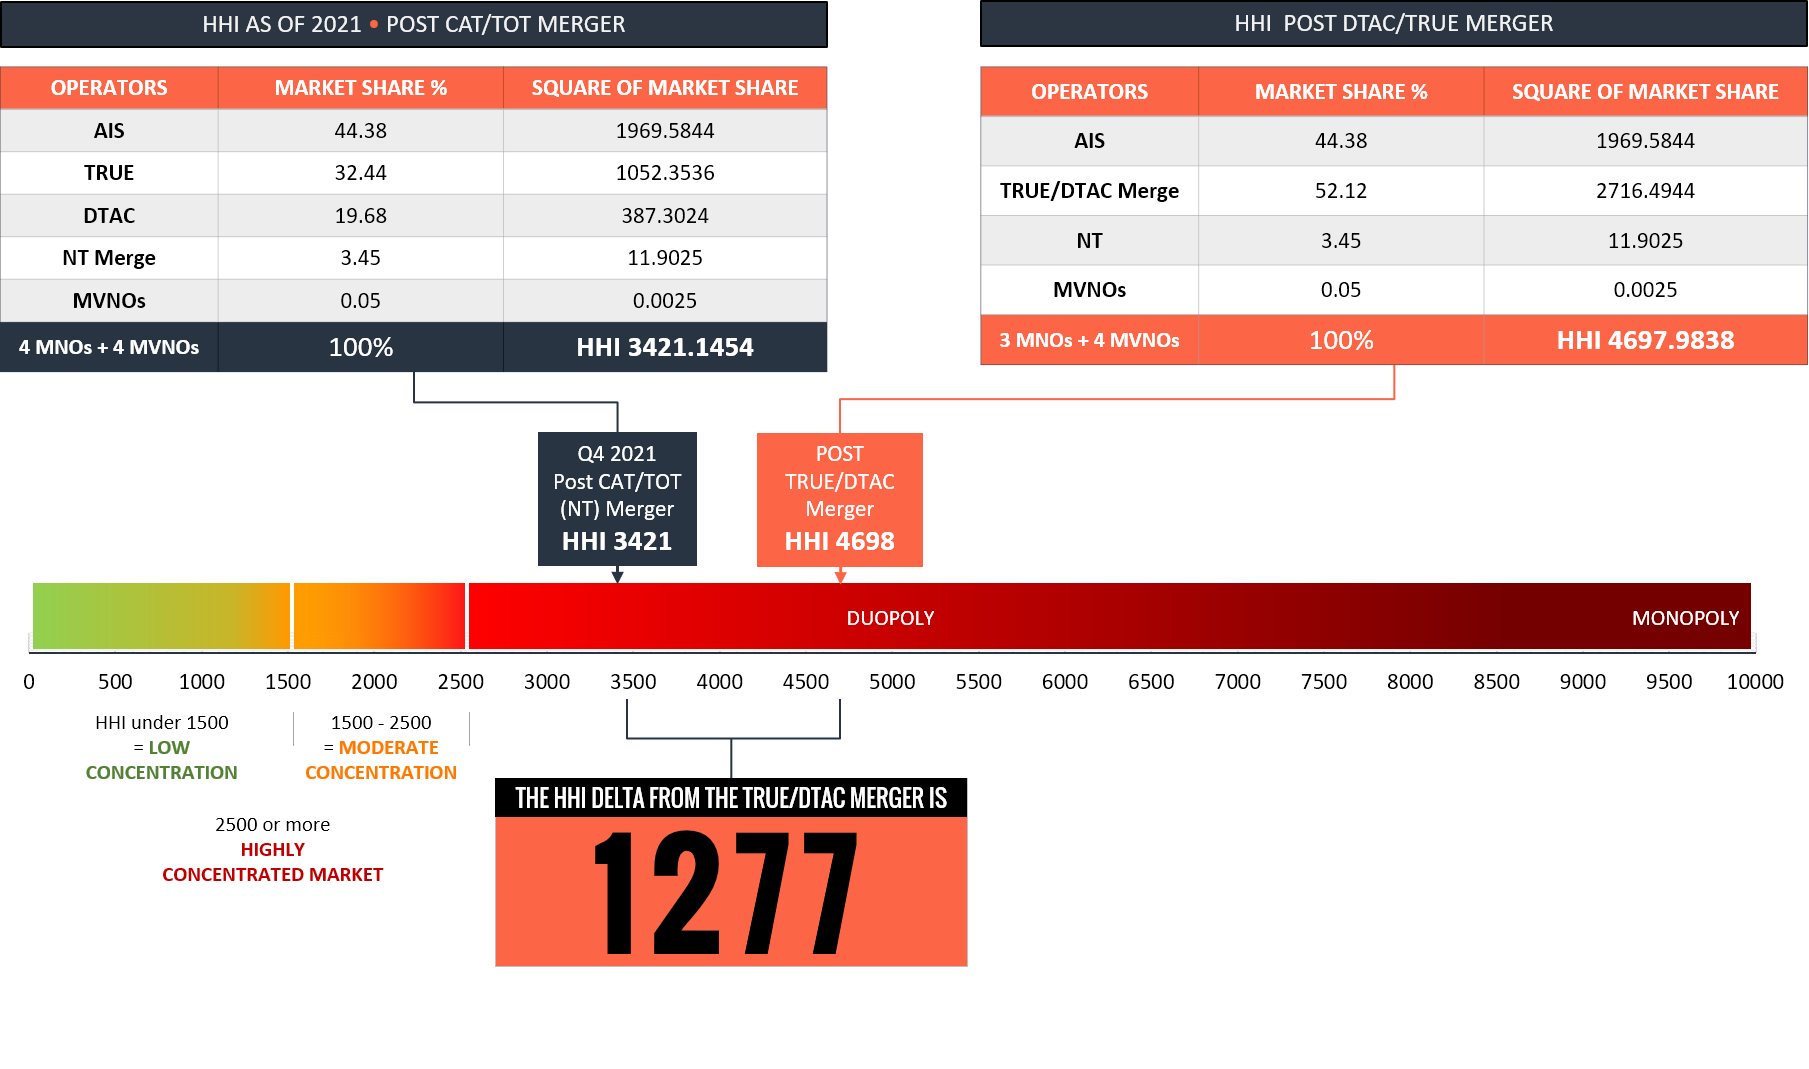 HHI calculation and delta from Q4 2021 to post a TRUE-DTAC merger